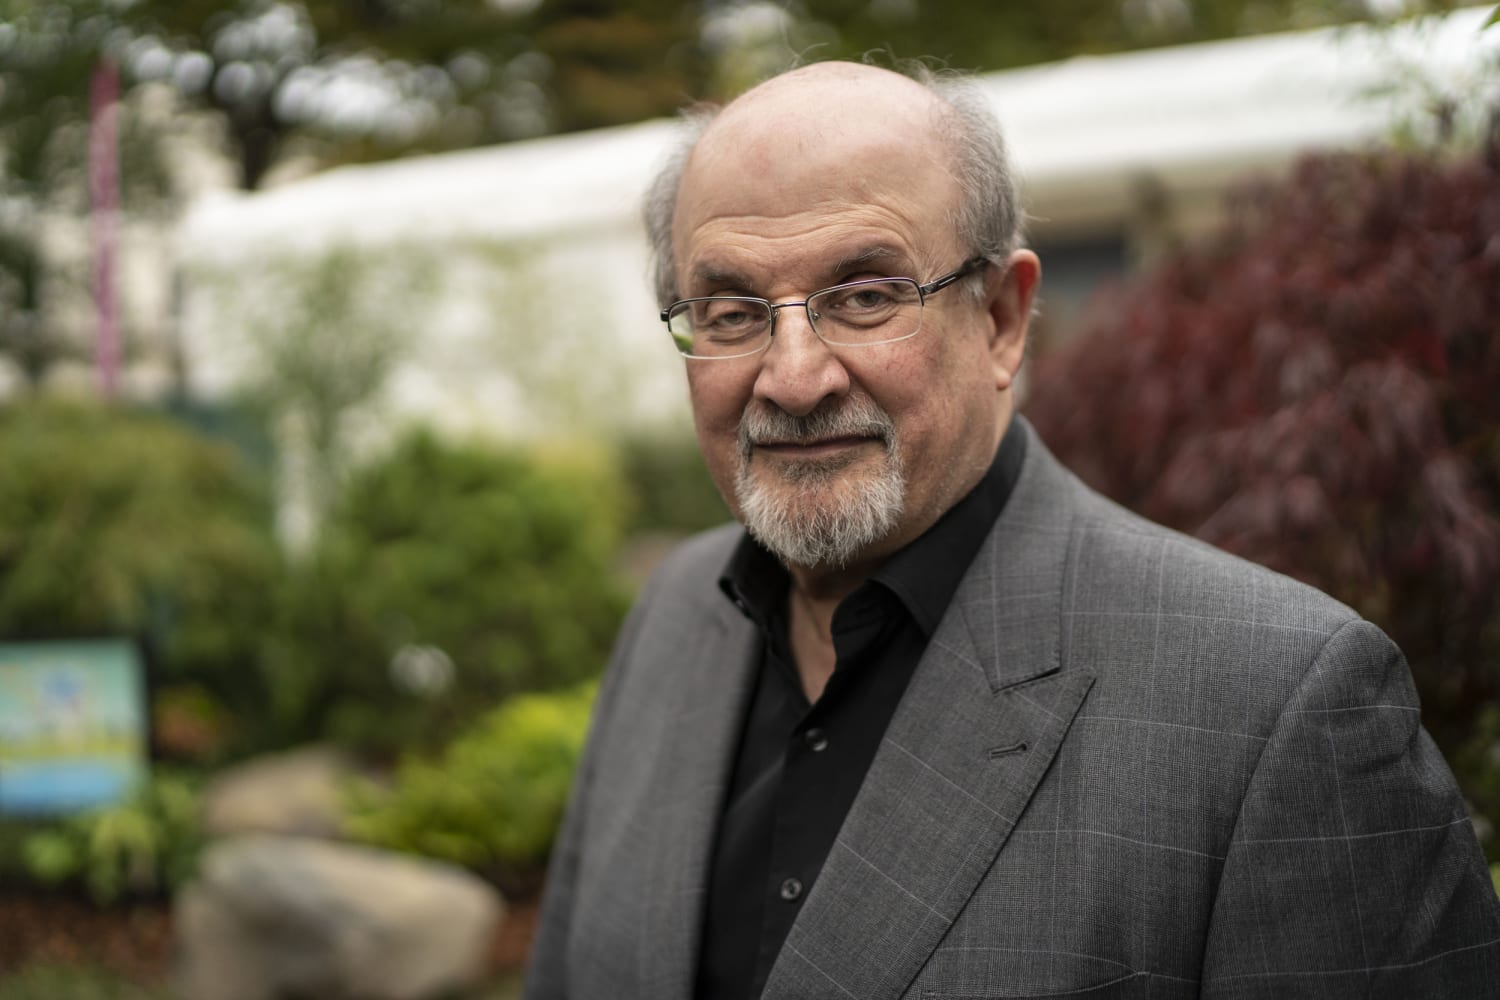 Author Salman Rushdie stabbed on stage before a lecture in New York, suspect identified and in custody